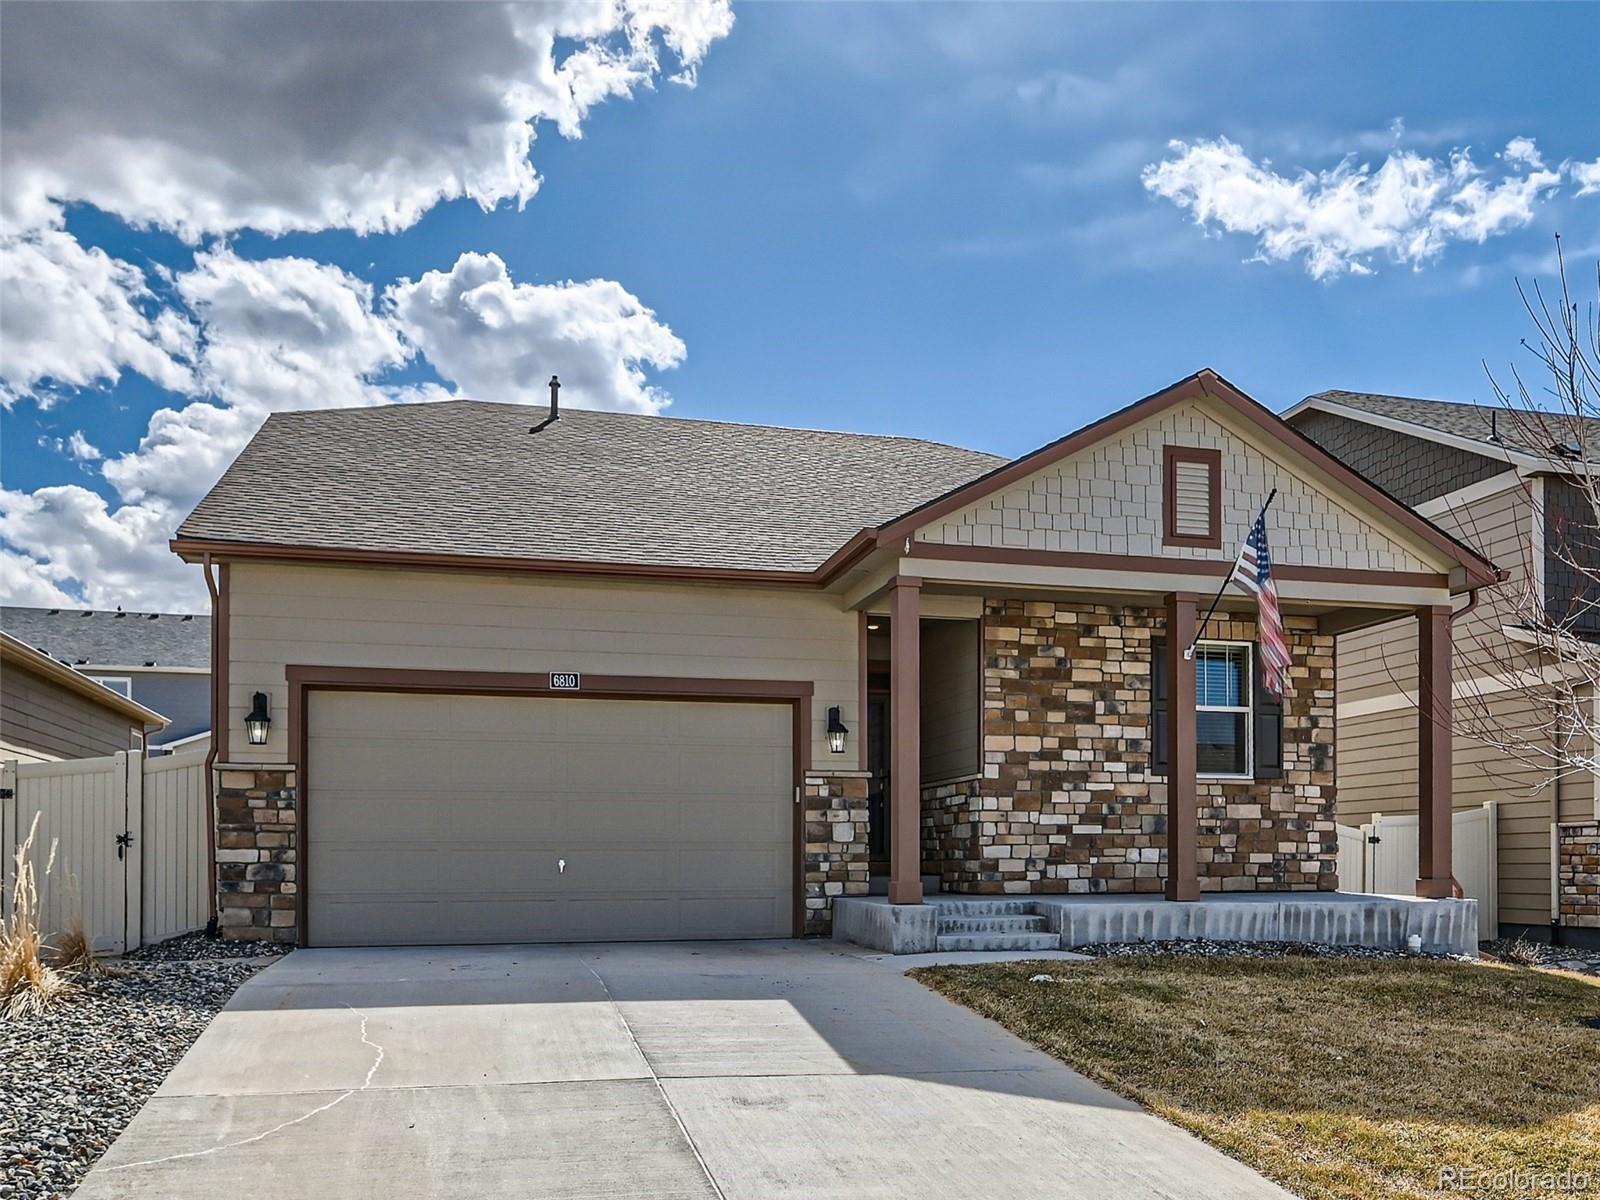 Report Image for 6810  Gwen Street,Frederick, Colorado